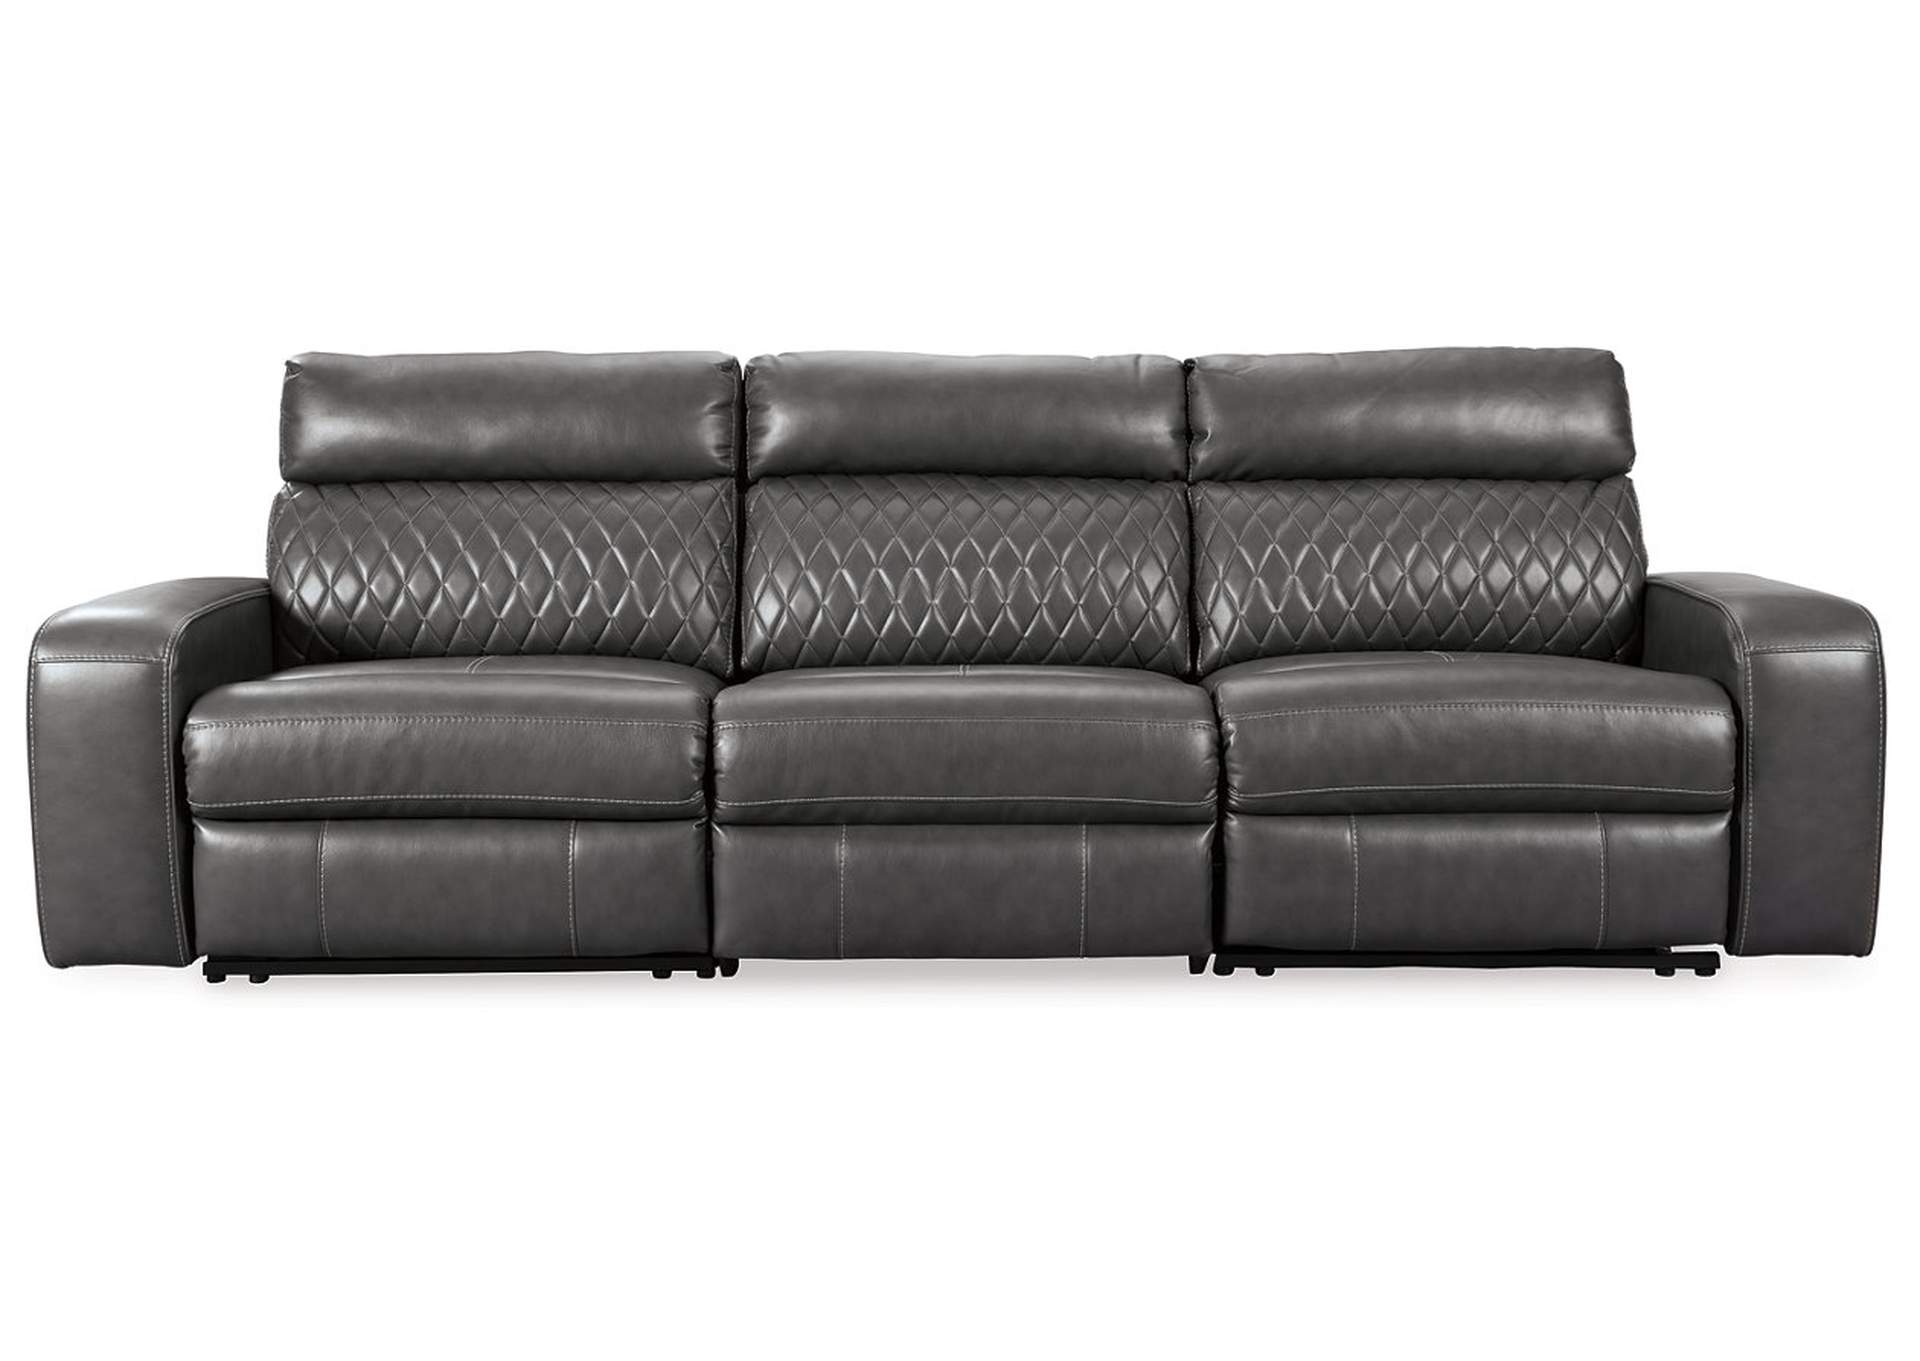 Samperstone 3-Piece Power Reclining Sectional Sofa,Signature Design By Ashley